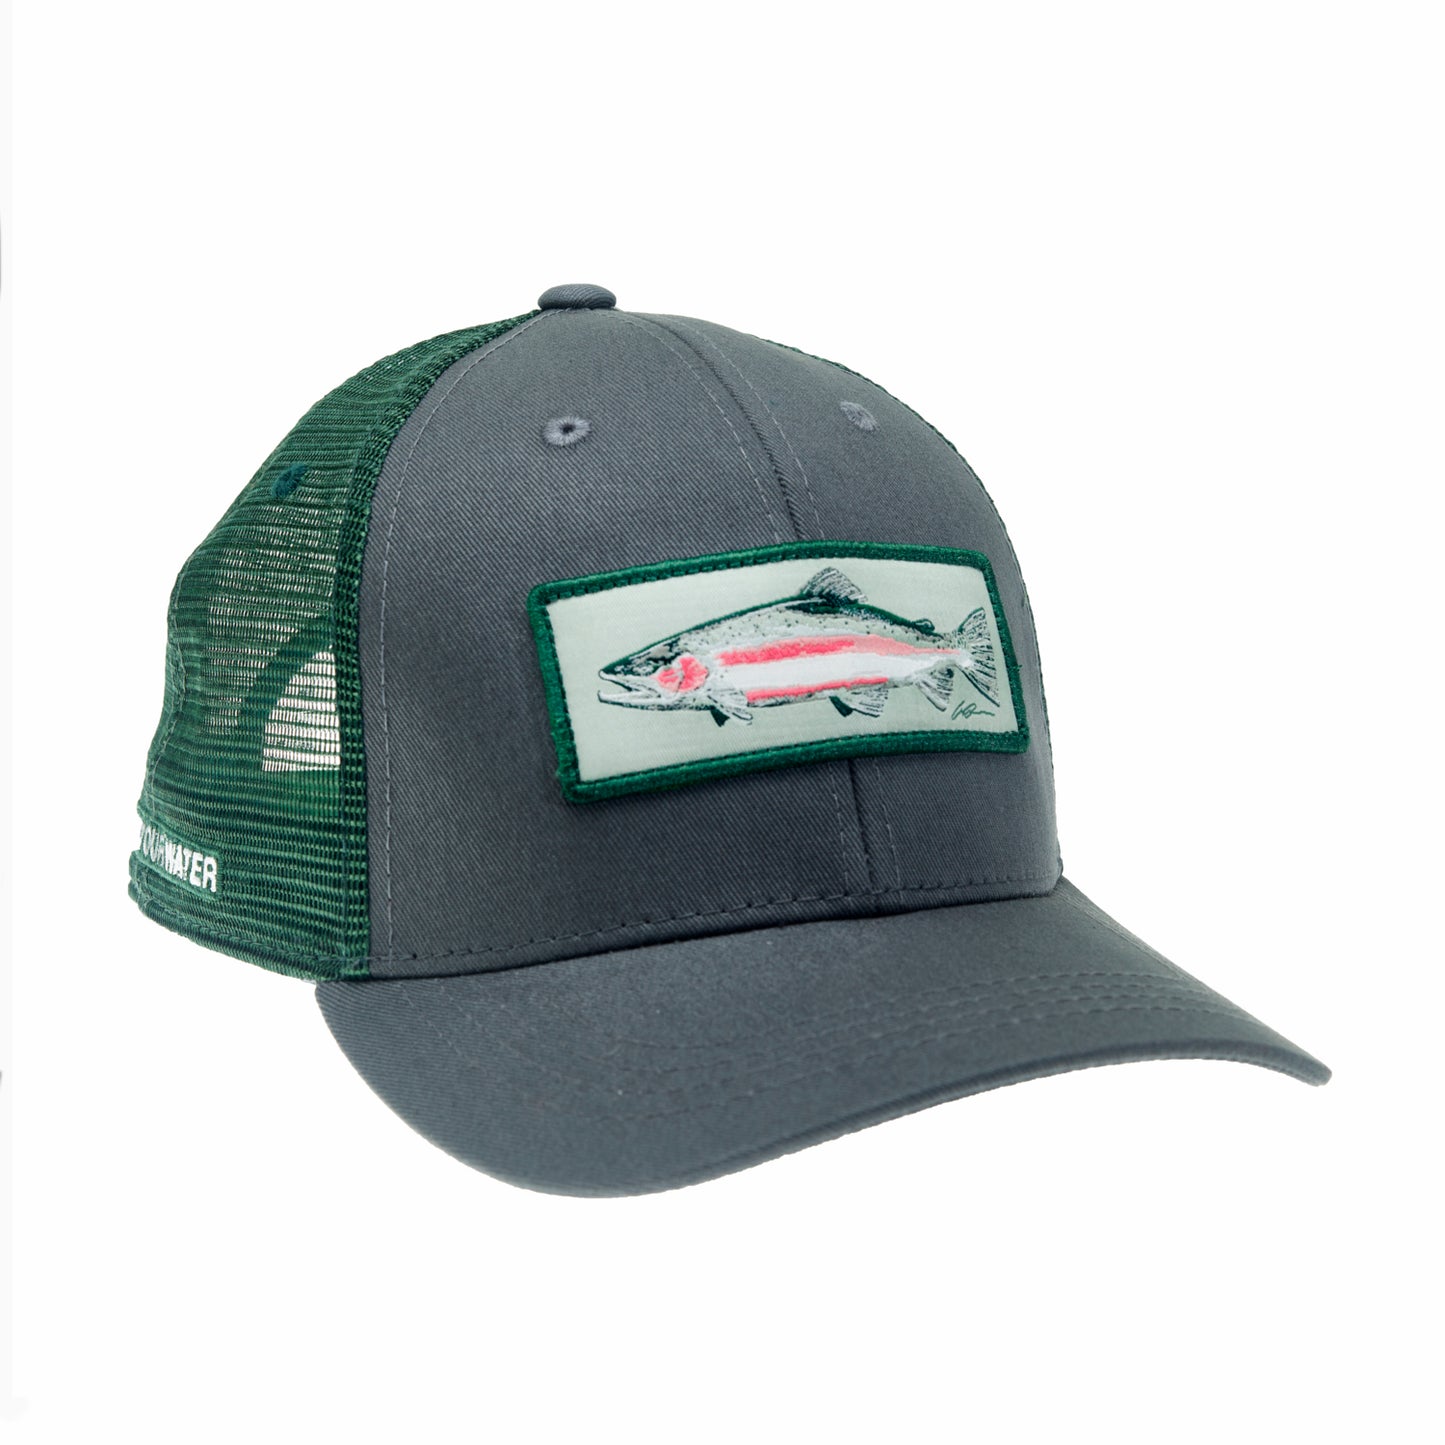 A hat with green mesh and gray fabric has a patch with a steelhead on it